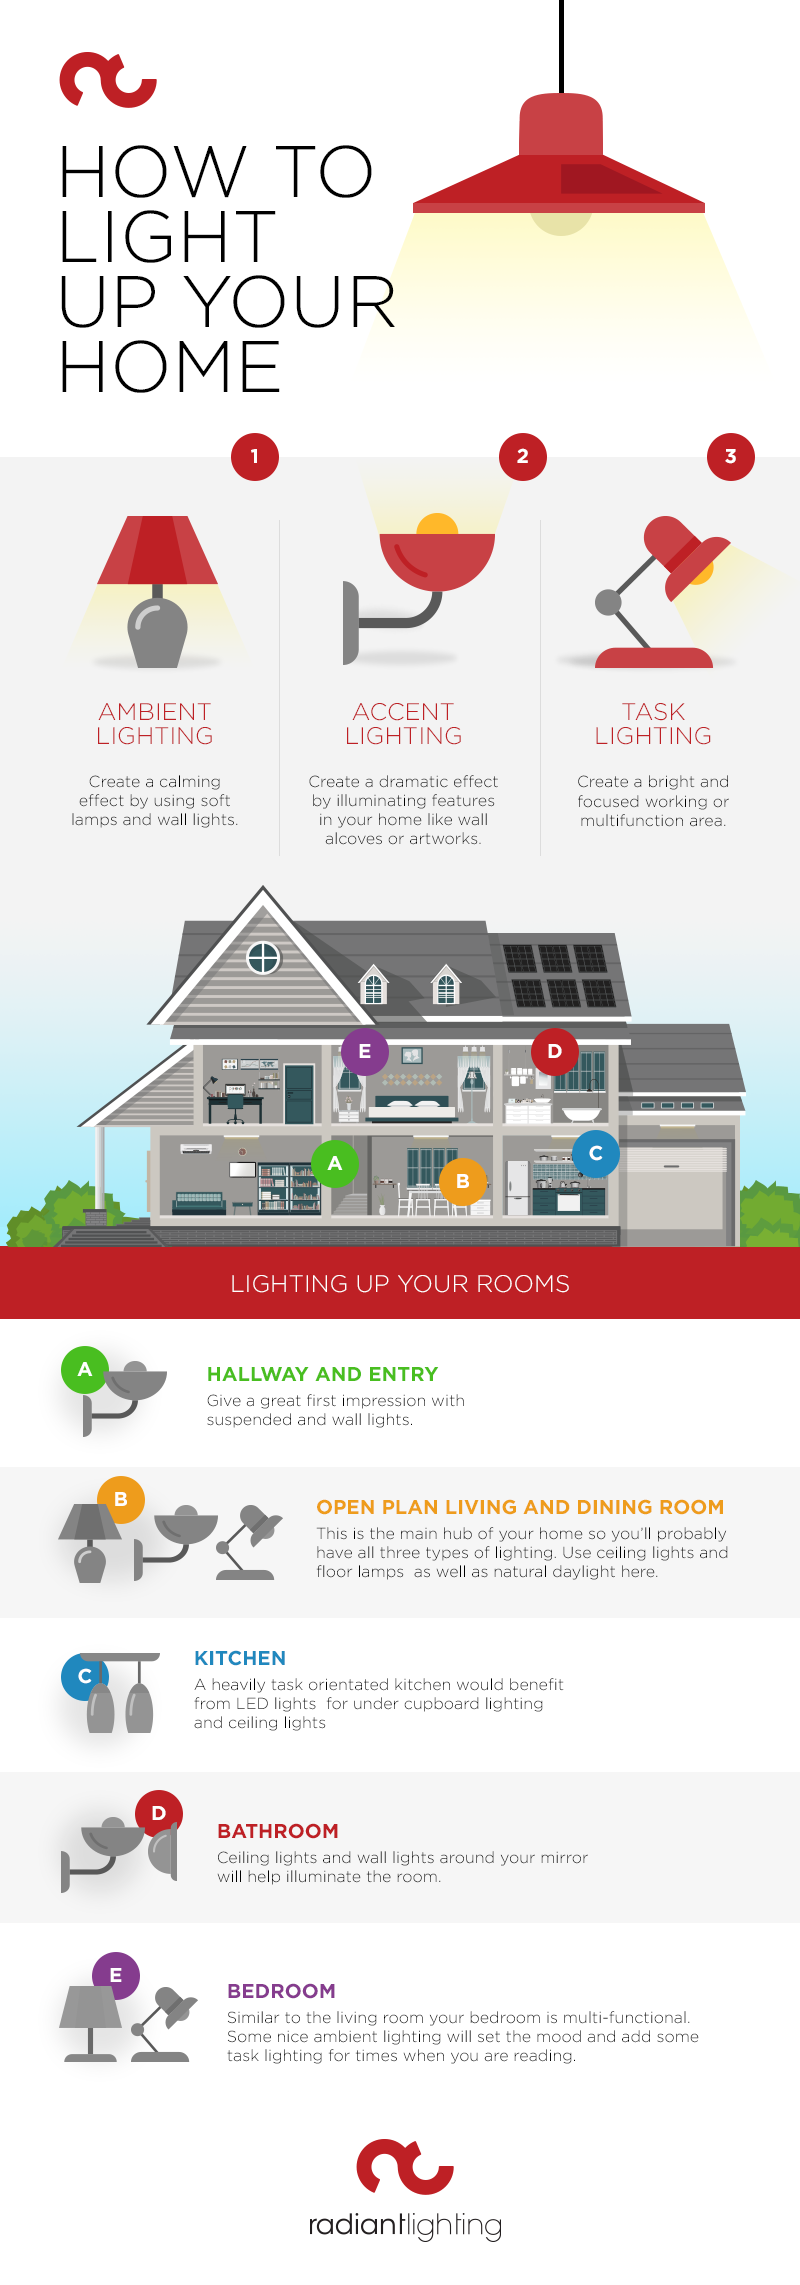 How to Light Up Your Home